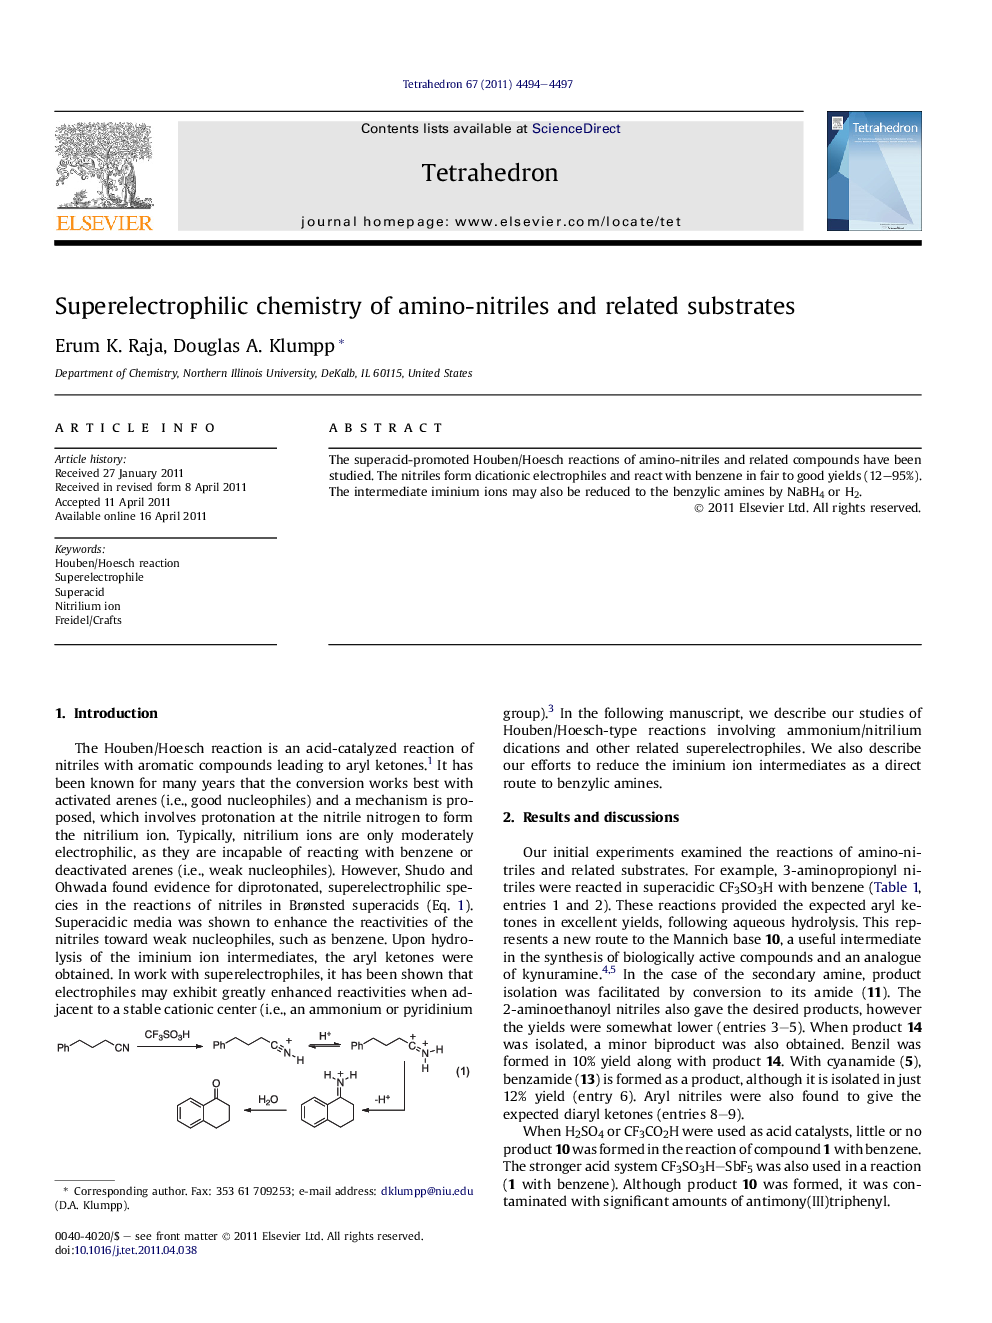 Superelectrophilic chemistry of amino-nitriles and related substrates